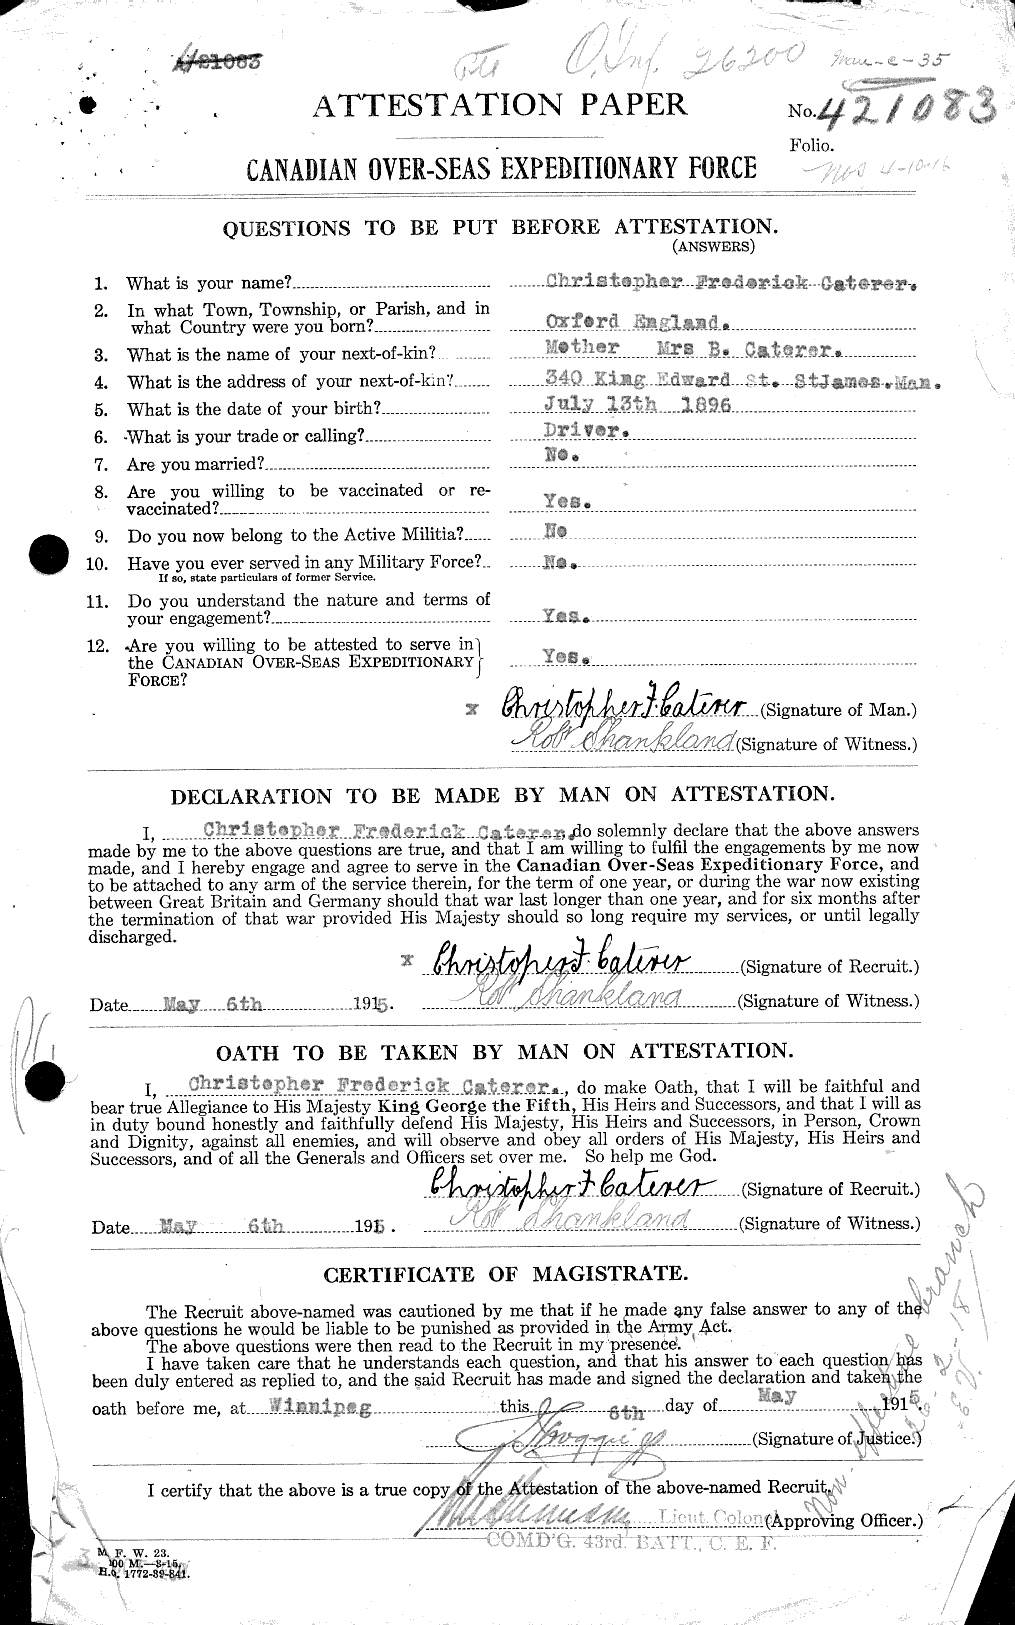 Personnel Records of the First World War - CEF 013215a